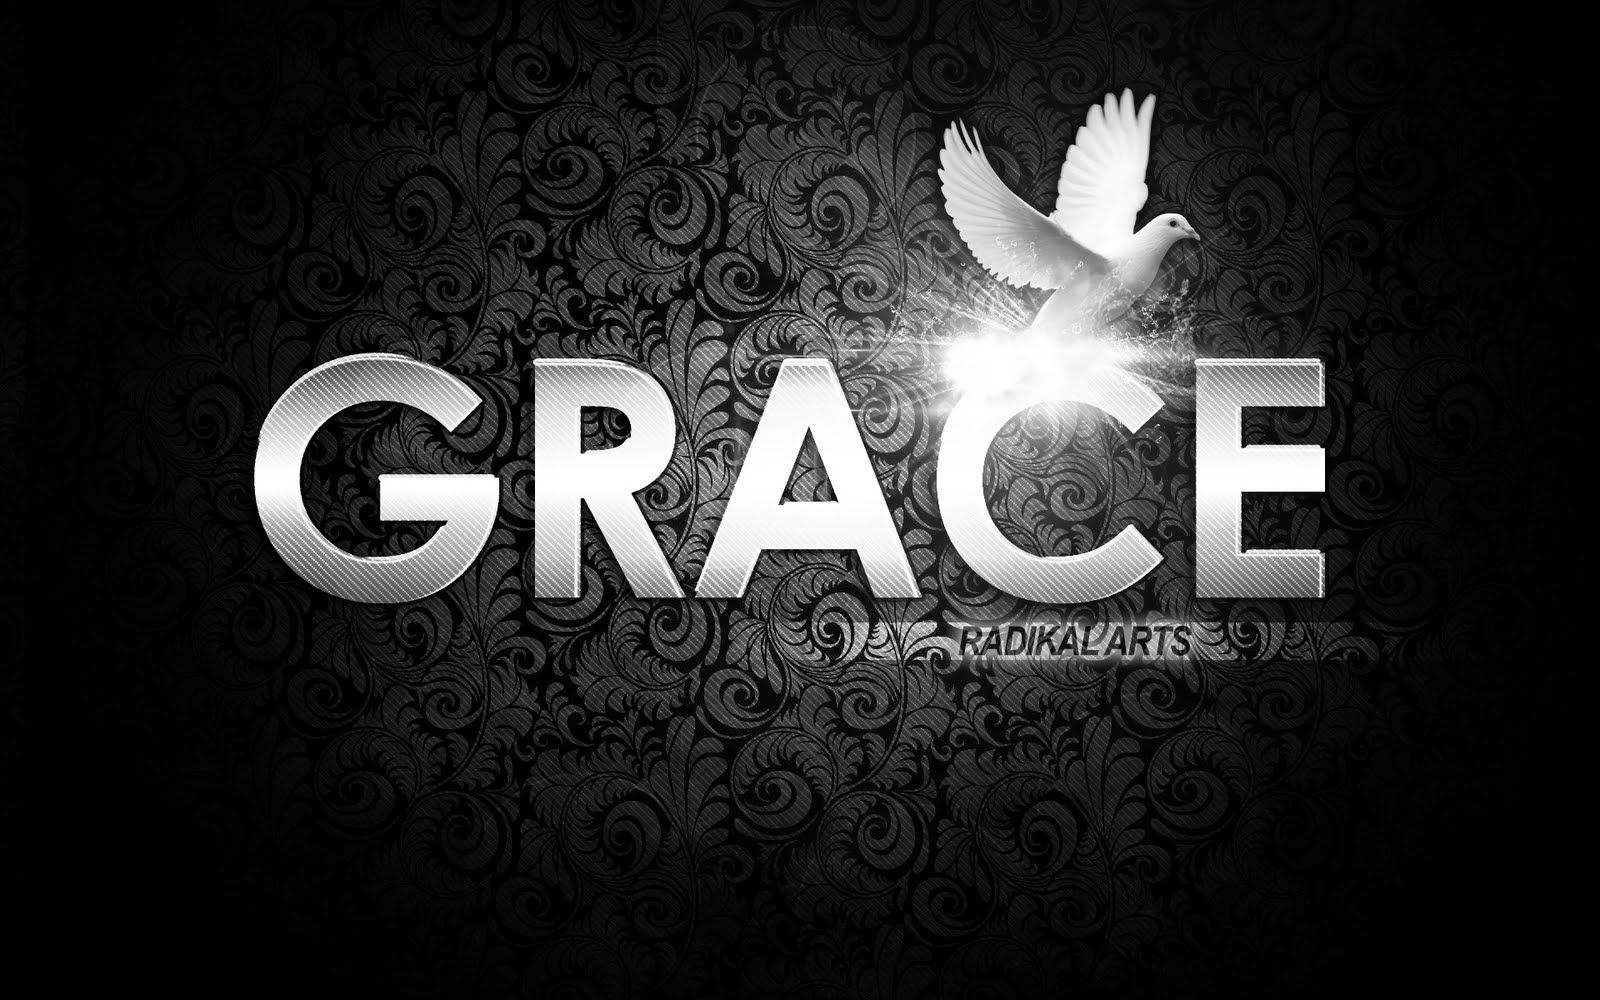 Christian Wallpapers Archives - Page 5 of 6 - Wallpaper